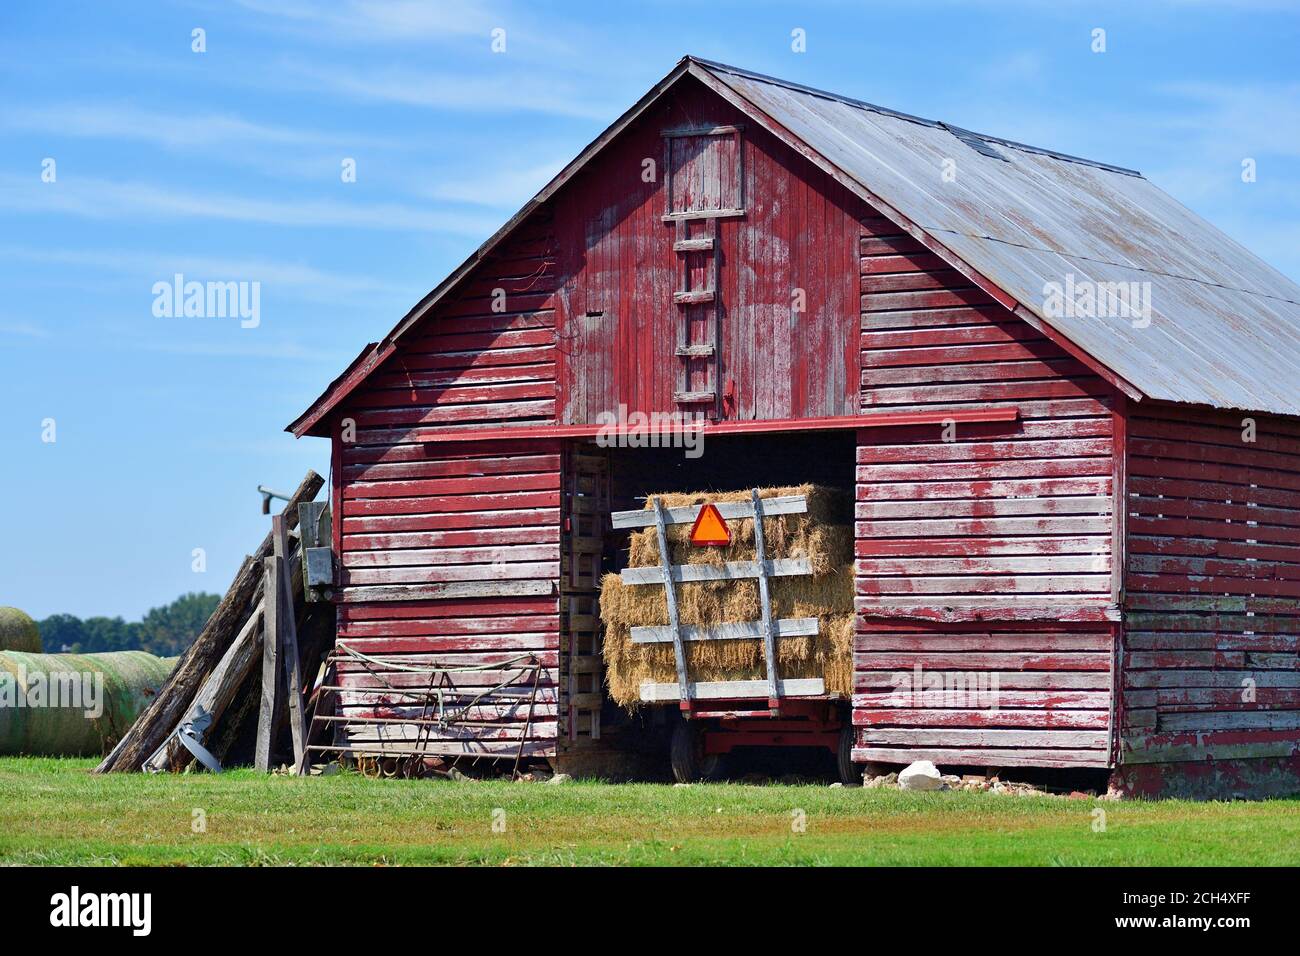 Lacon, Illinois, USA. An old red, wooden barn containing a hay wagon. The rural scene is from north central Illinois in the Illinois River Valley. Stock Photo